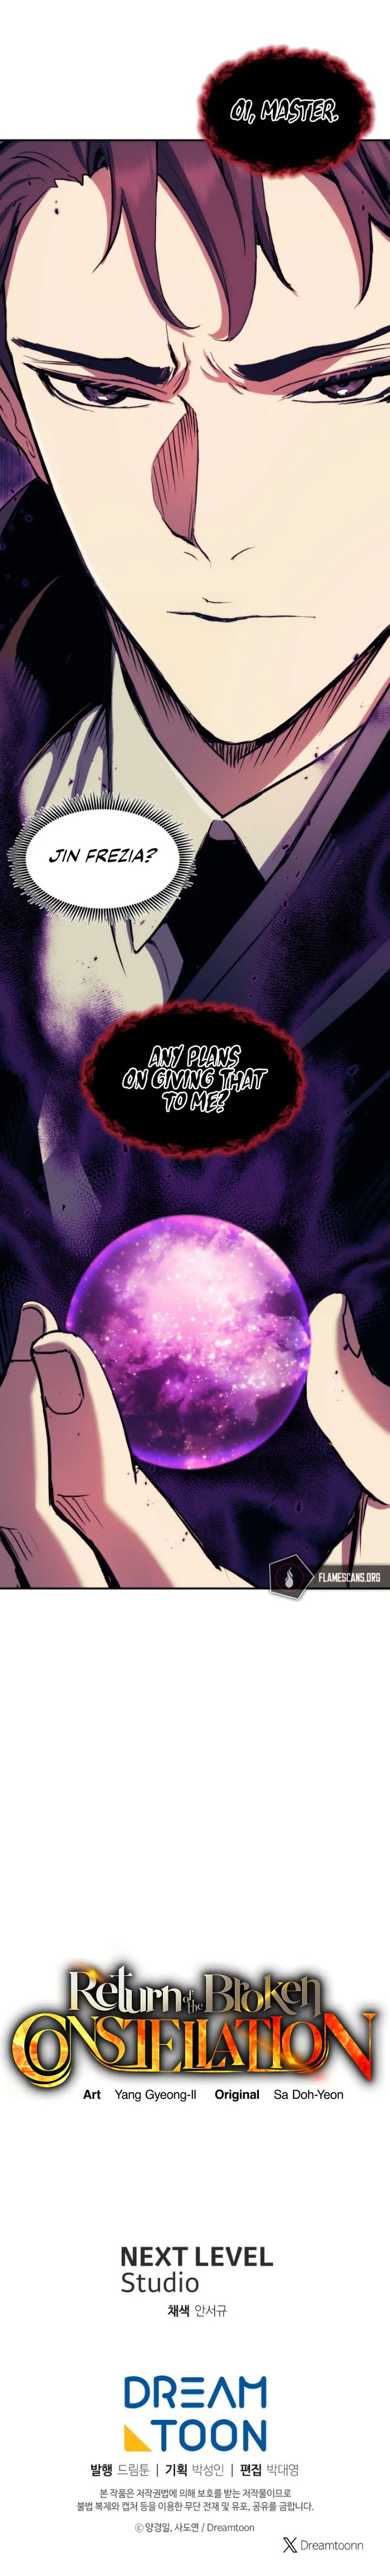 return-of-the-shattered-constellation-chap-82-12